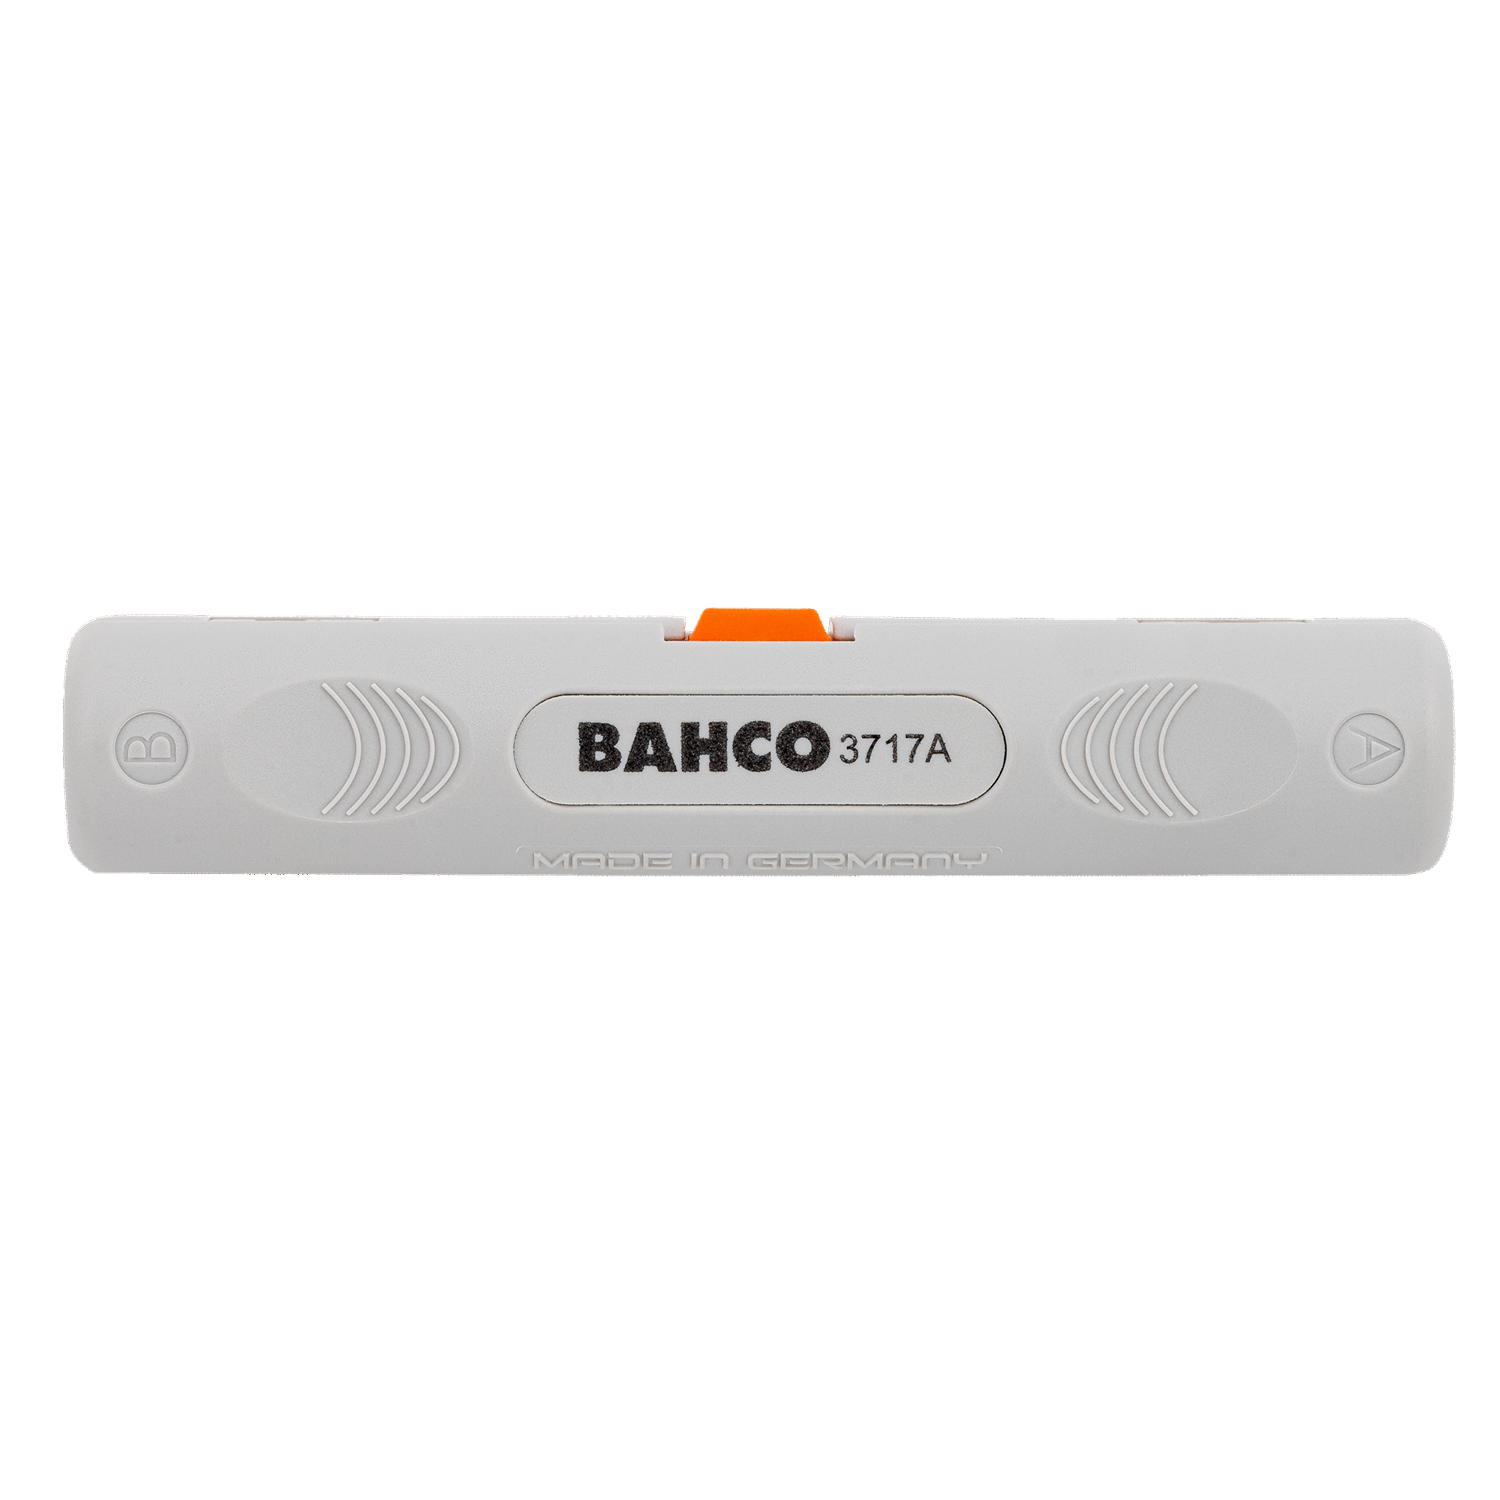 BAHCO 3717 A Wire Stripping Plier Tool For PVC Data Cables - Premium Wire Stripping Plier from BAHCO - Shop now at Yew Aik.